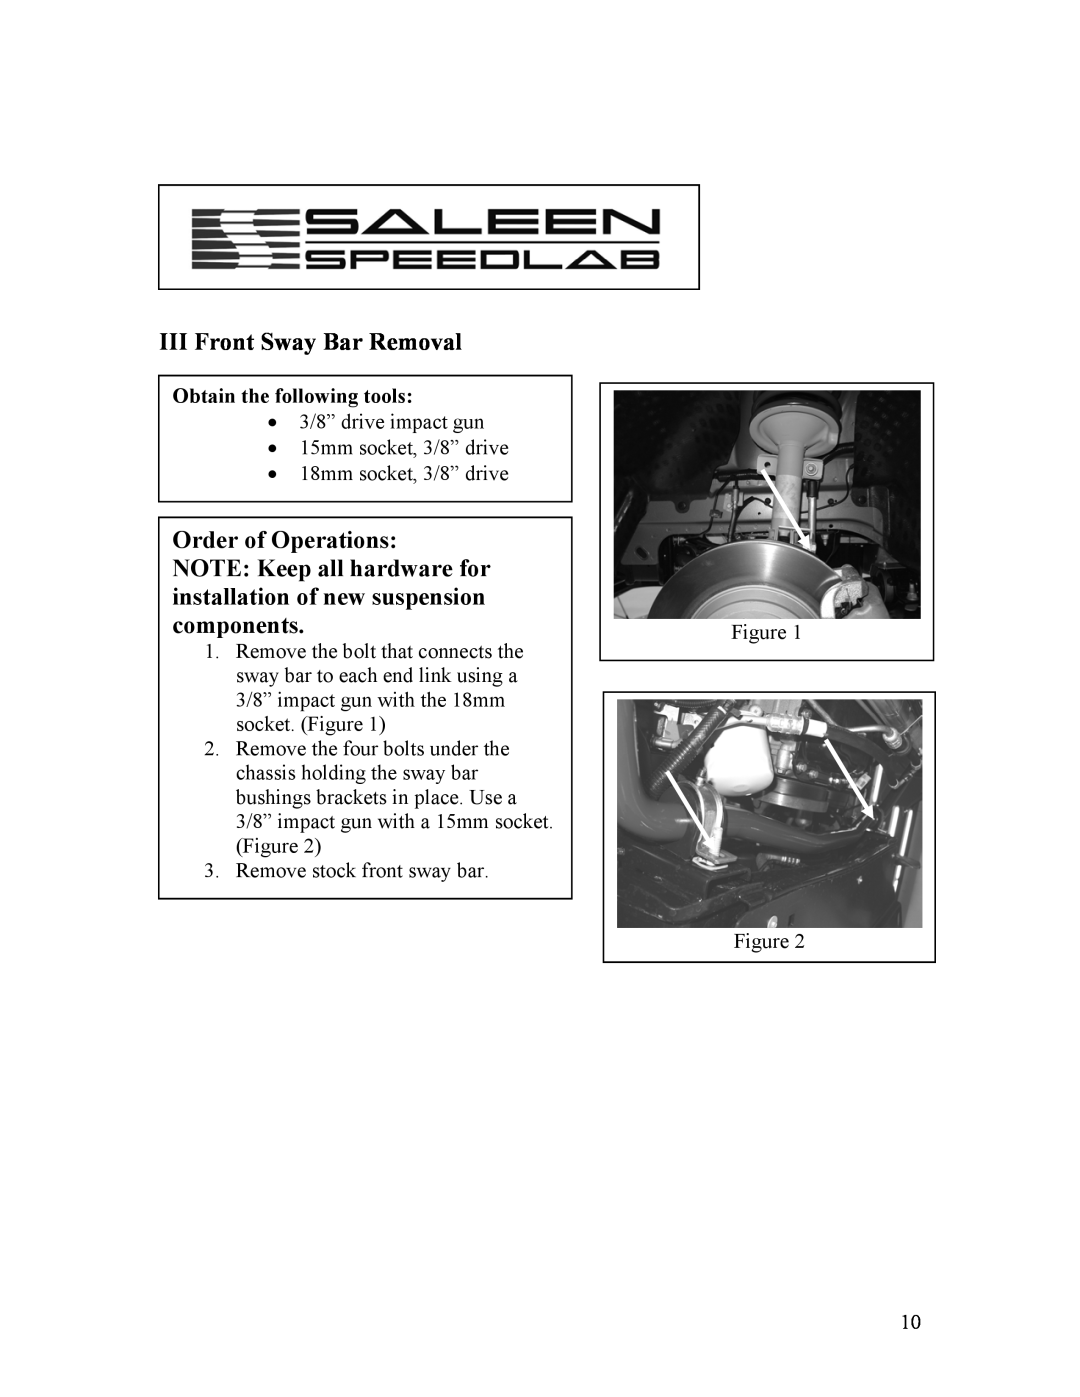 Saleen 10-8002-C11790A installation manual III Front Sway Bar Removal, Order of Operations, Obtain the following tools 